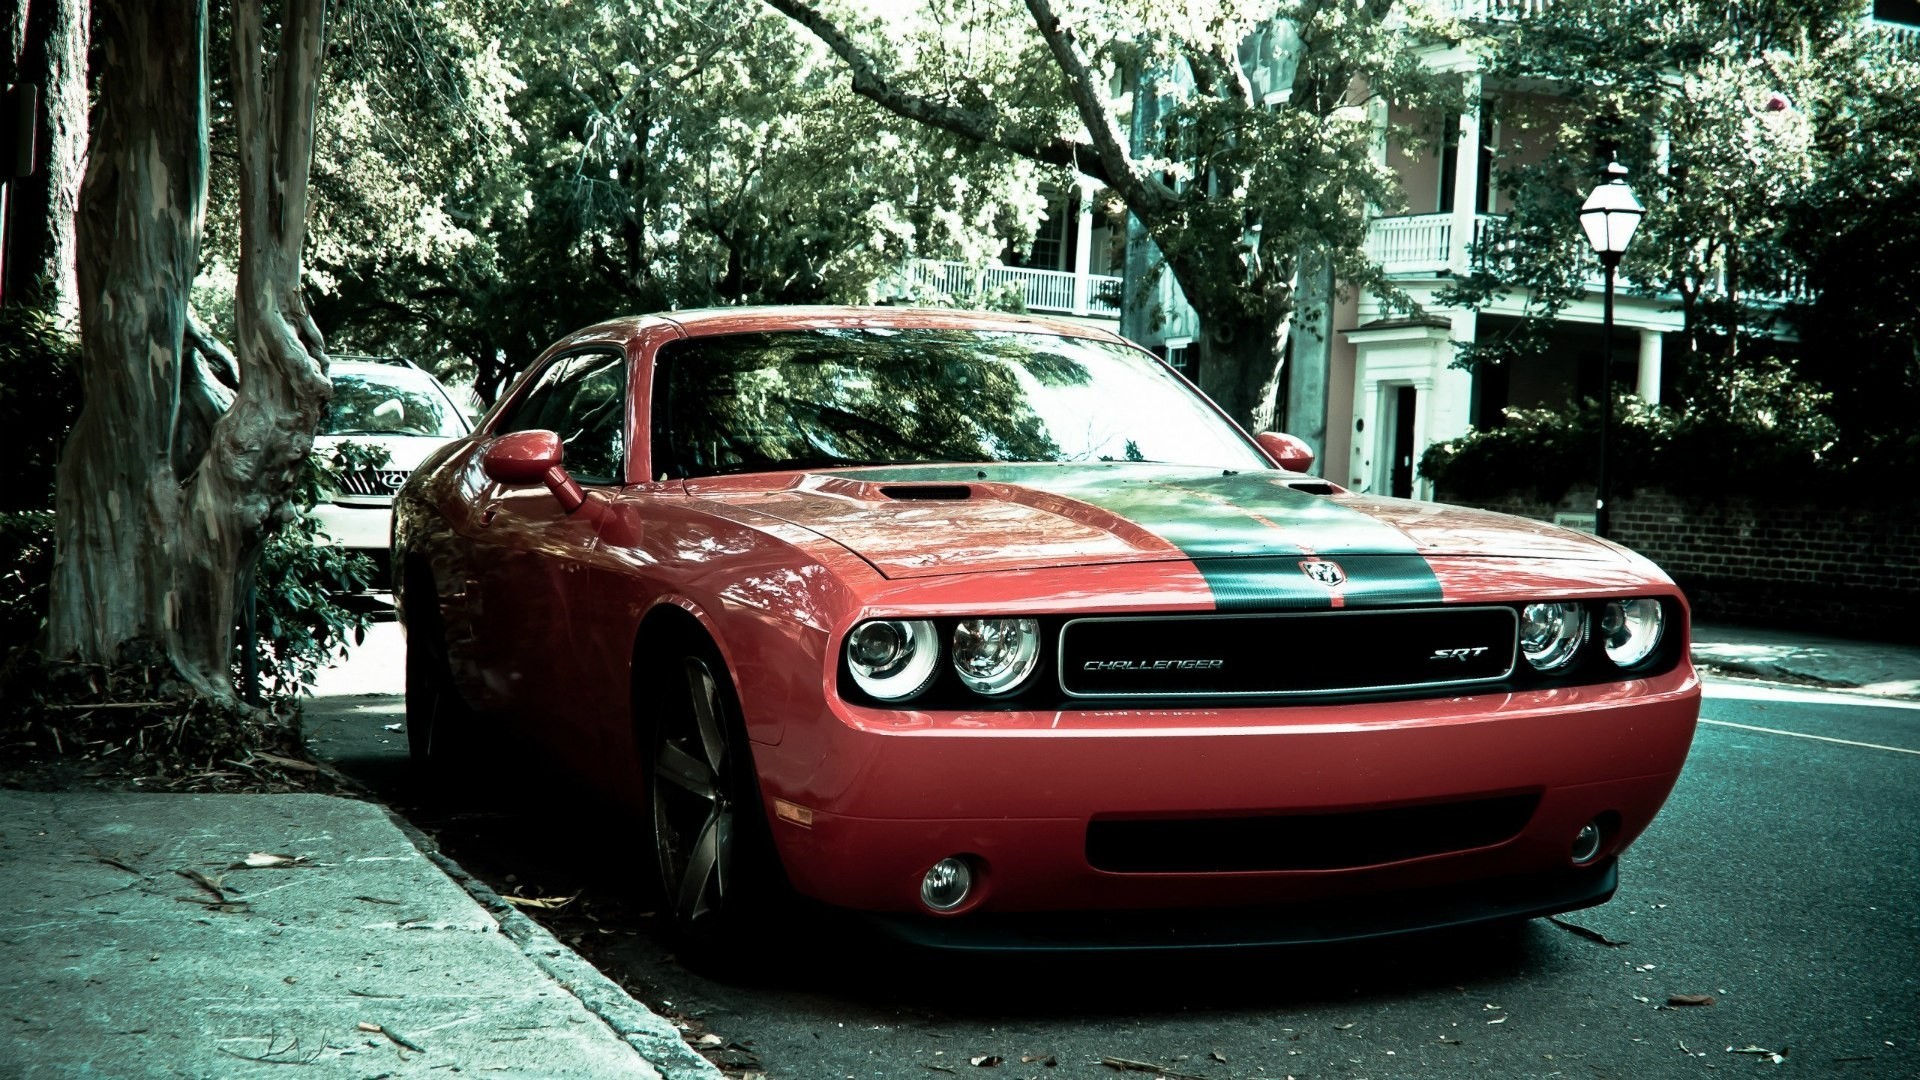 Dodge Challenger, Car, Muscle Cars, Red, Street Wallpaper